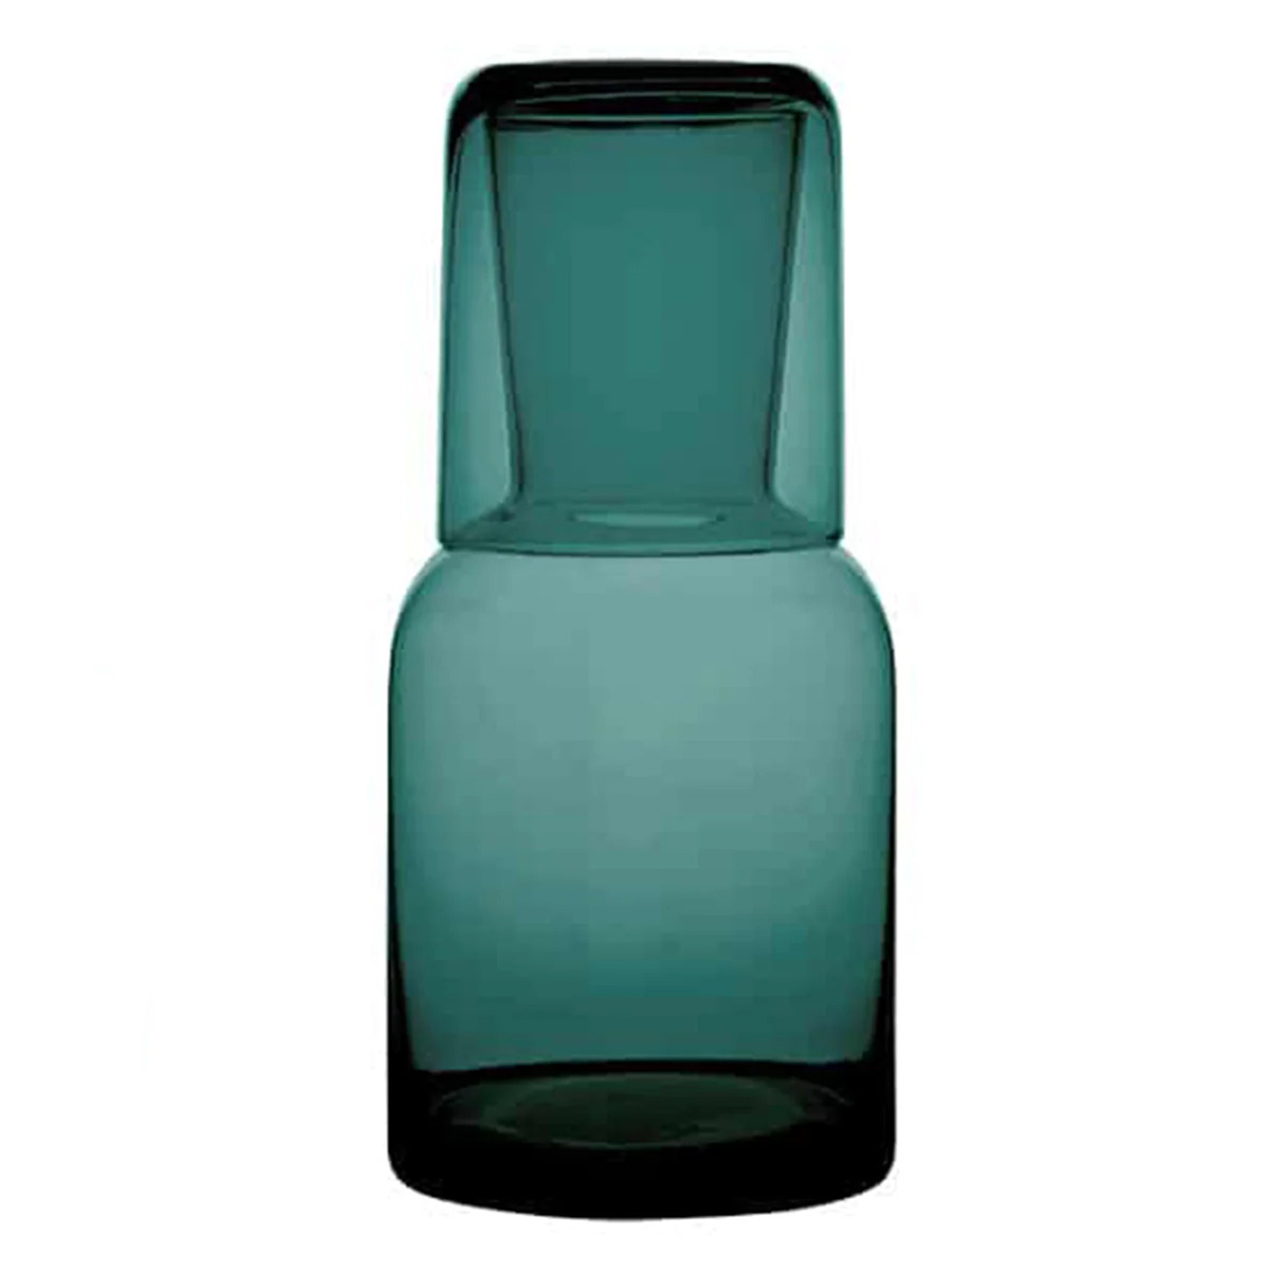 Teal water carafe and tumbler set by Annabel Trends